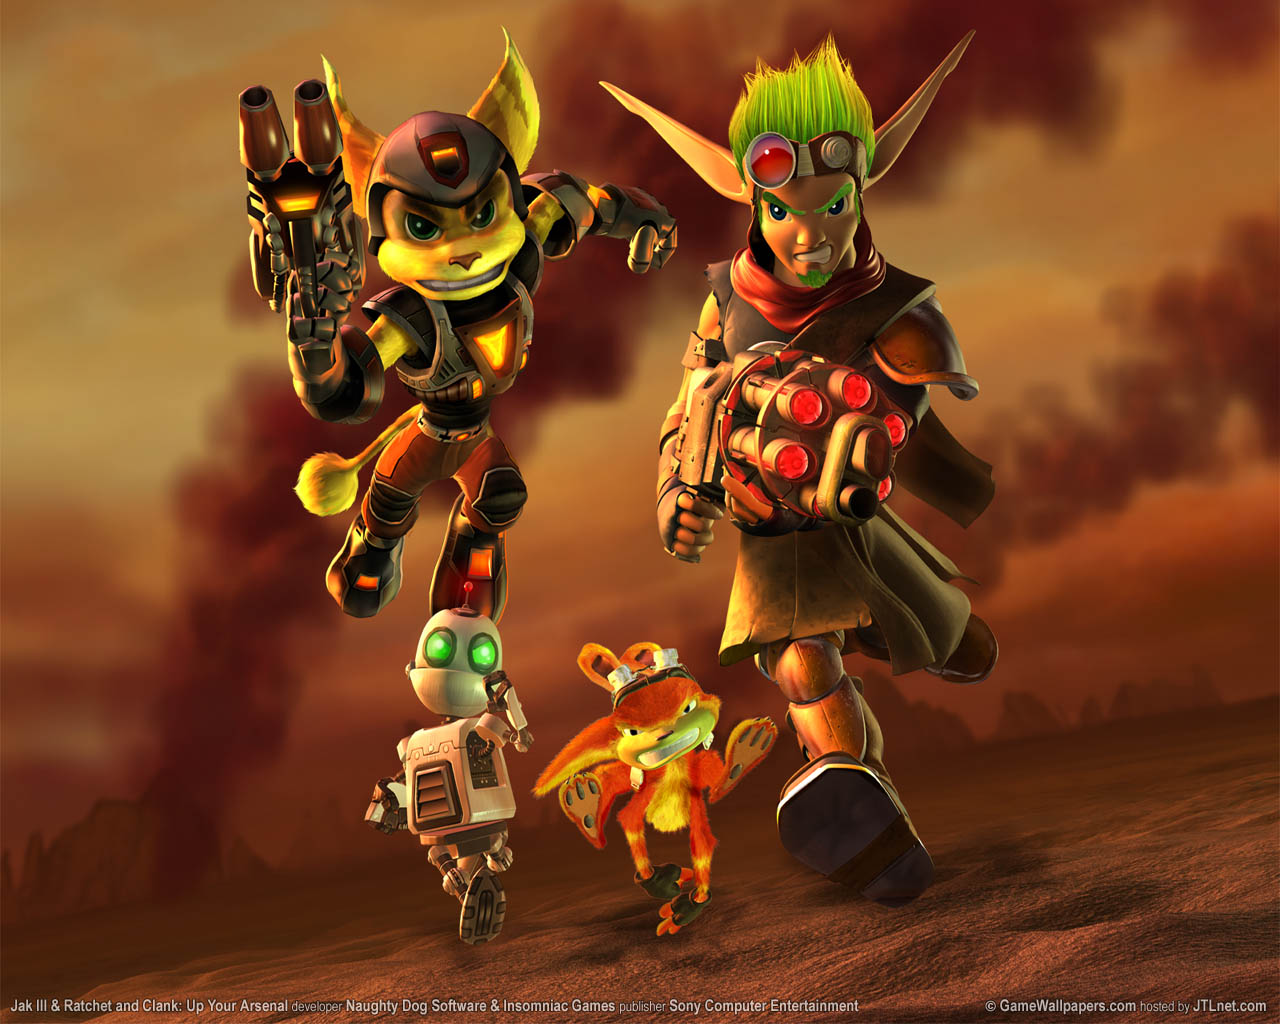 Jak 3 & Ratchet and Clank: Up Your Arsenal fond d'cran 01 1280x1024